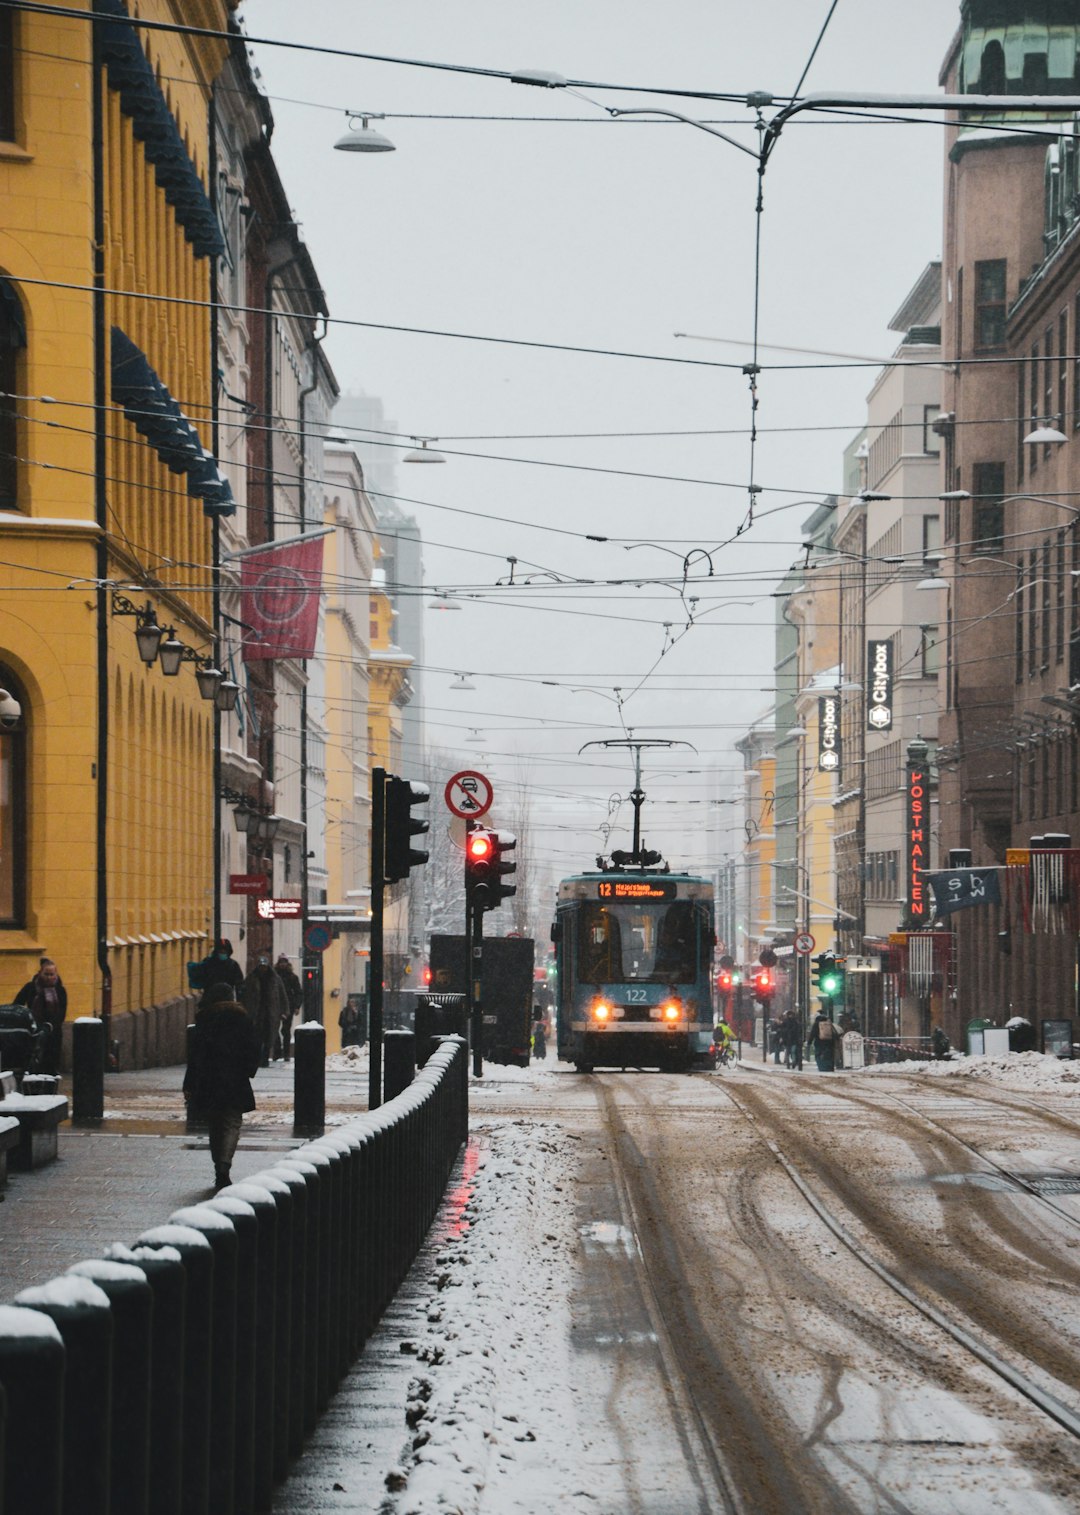 yellow tram on road near buildings during daytime